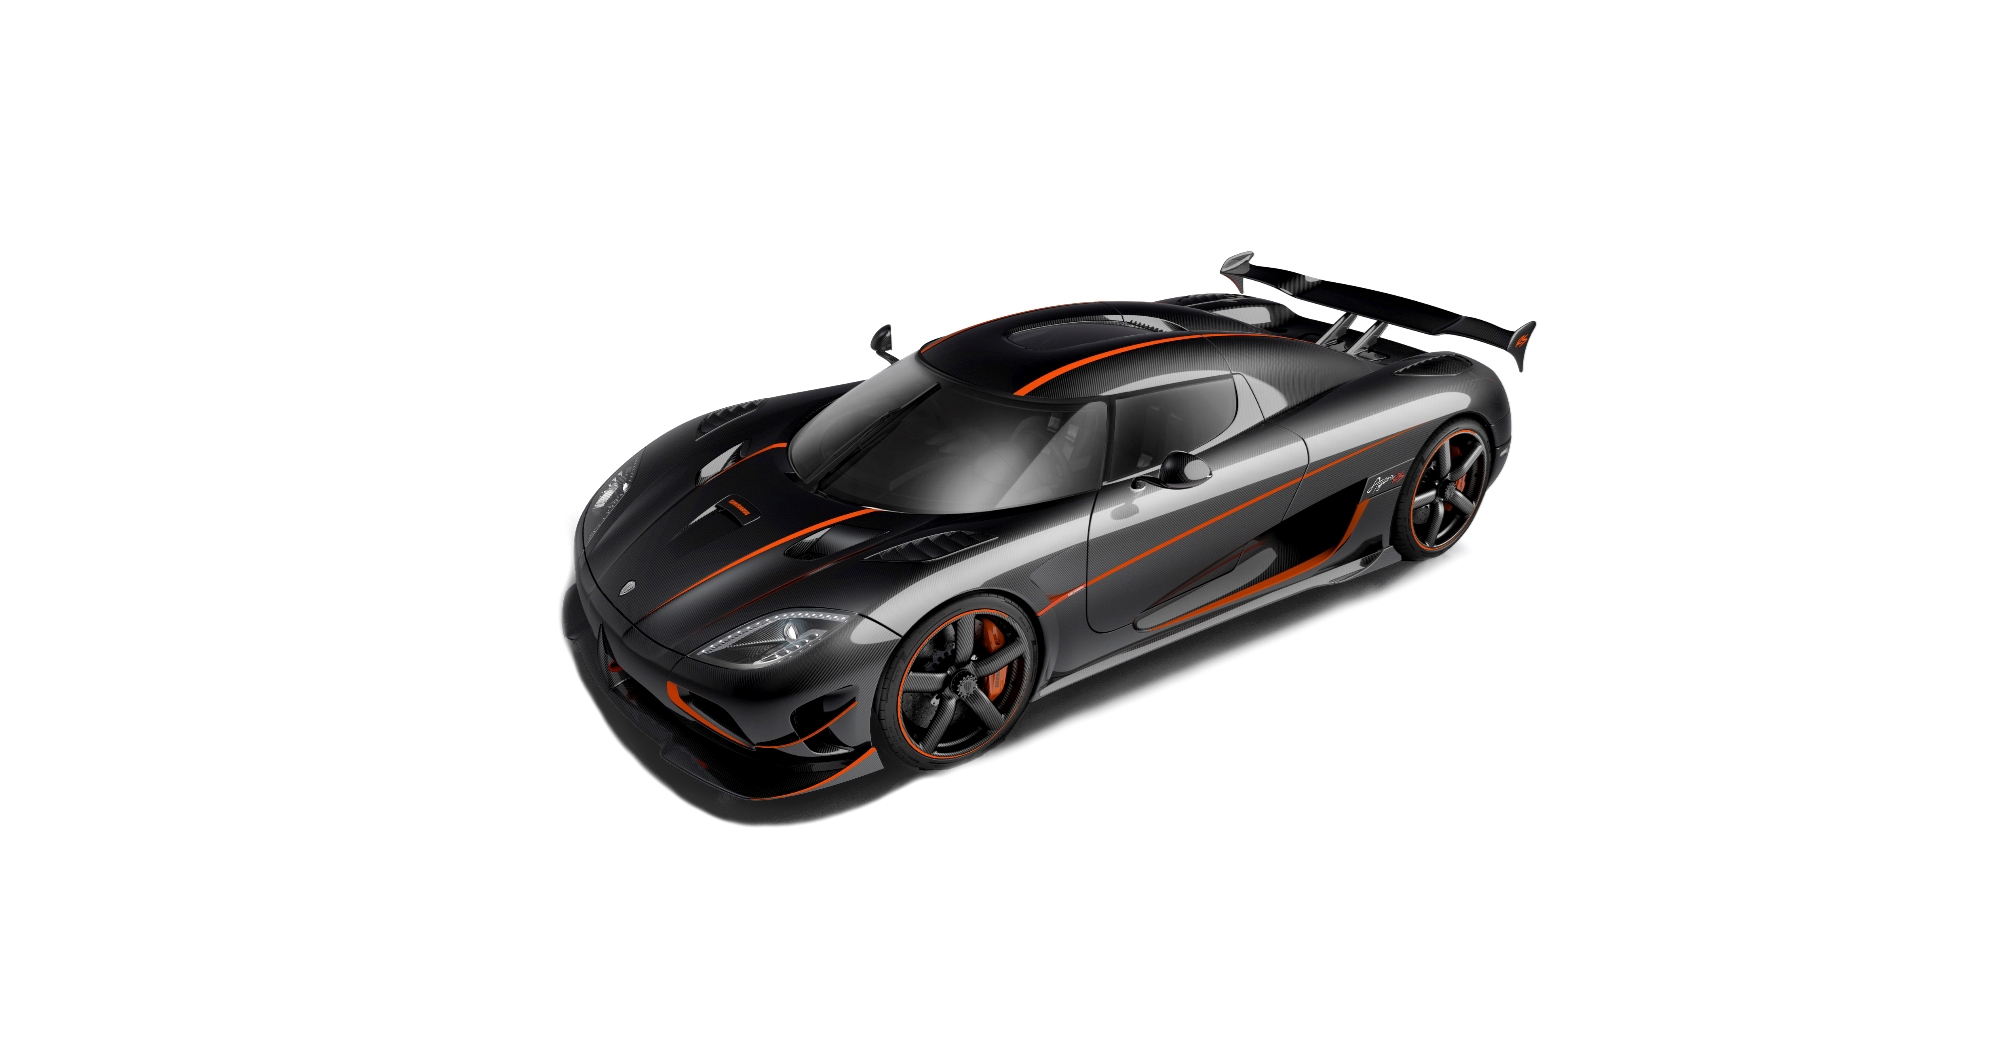 Koenigsegg Agera RS Full Specs, Features and Price | CarBuzz